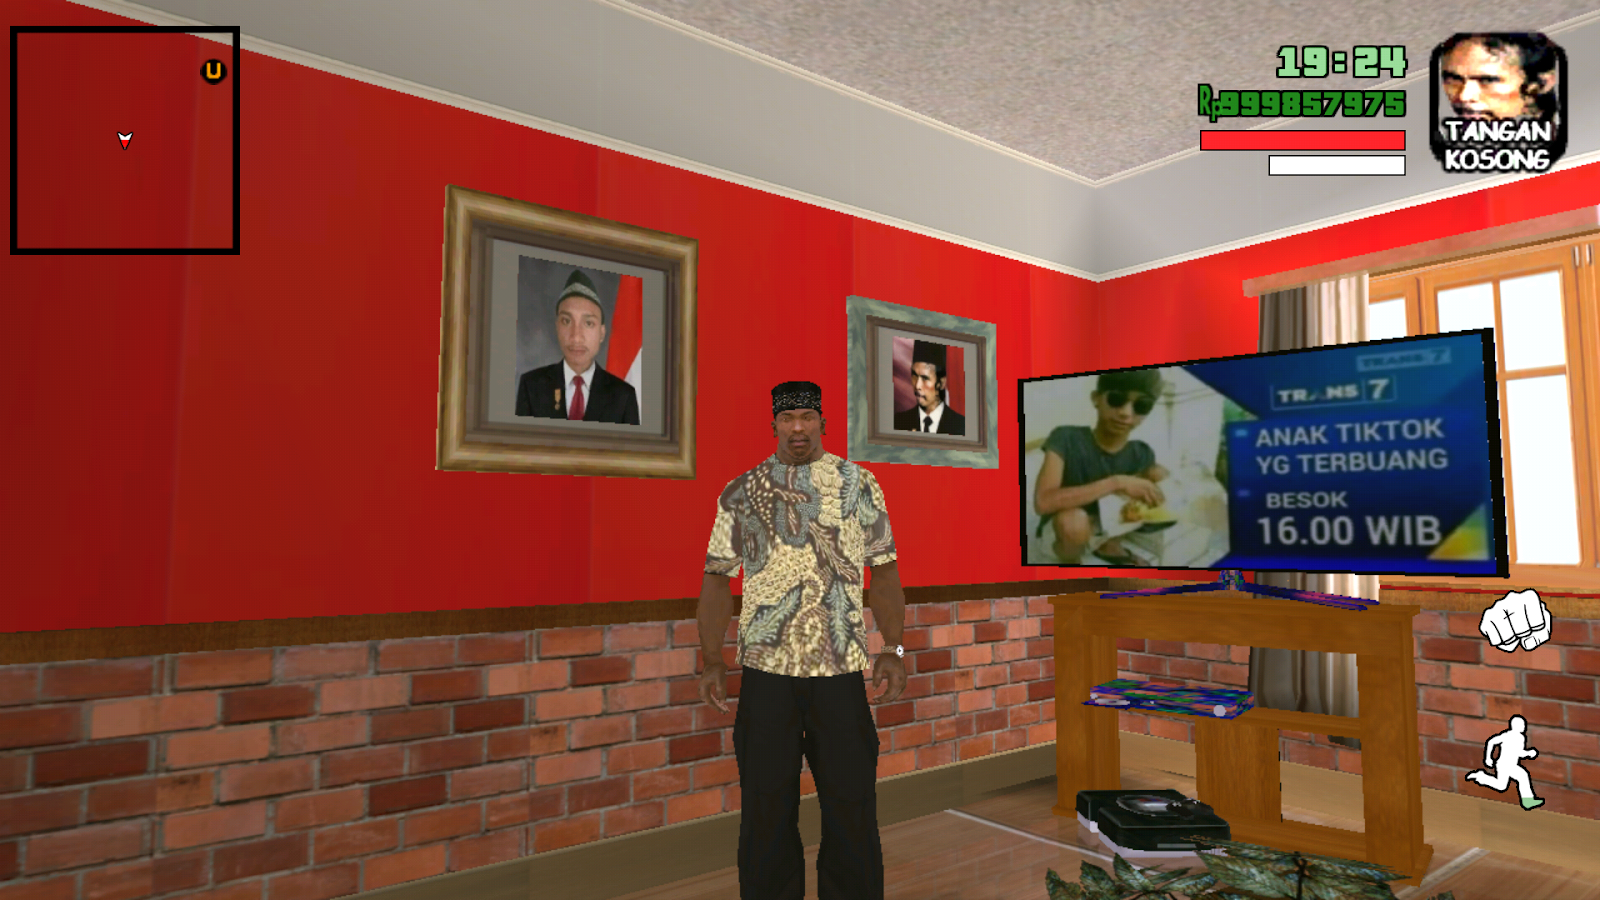 Gta Extreme Indonesia V3 Android Ilham 51